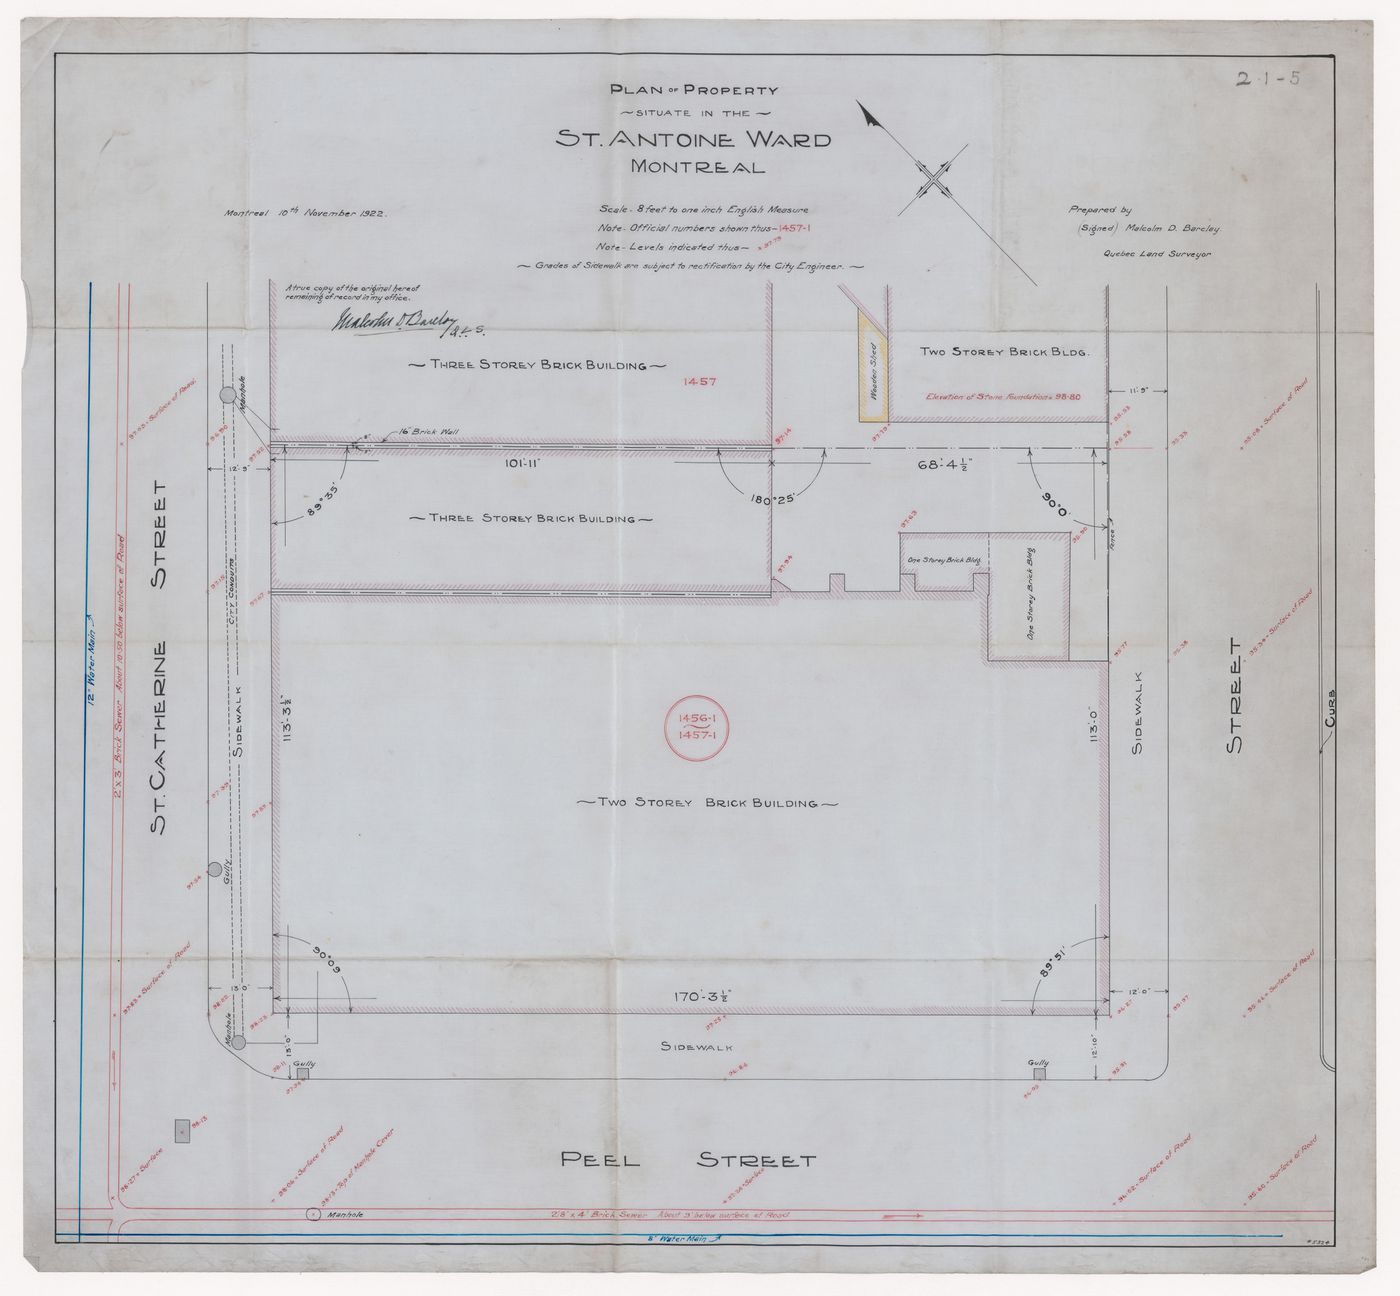 Plan of property in St Antoine Ward for Dominion Square Building, Montreal, Québec